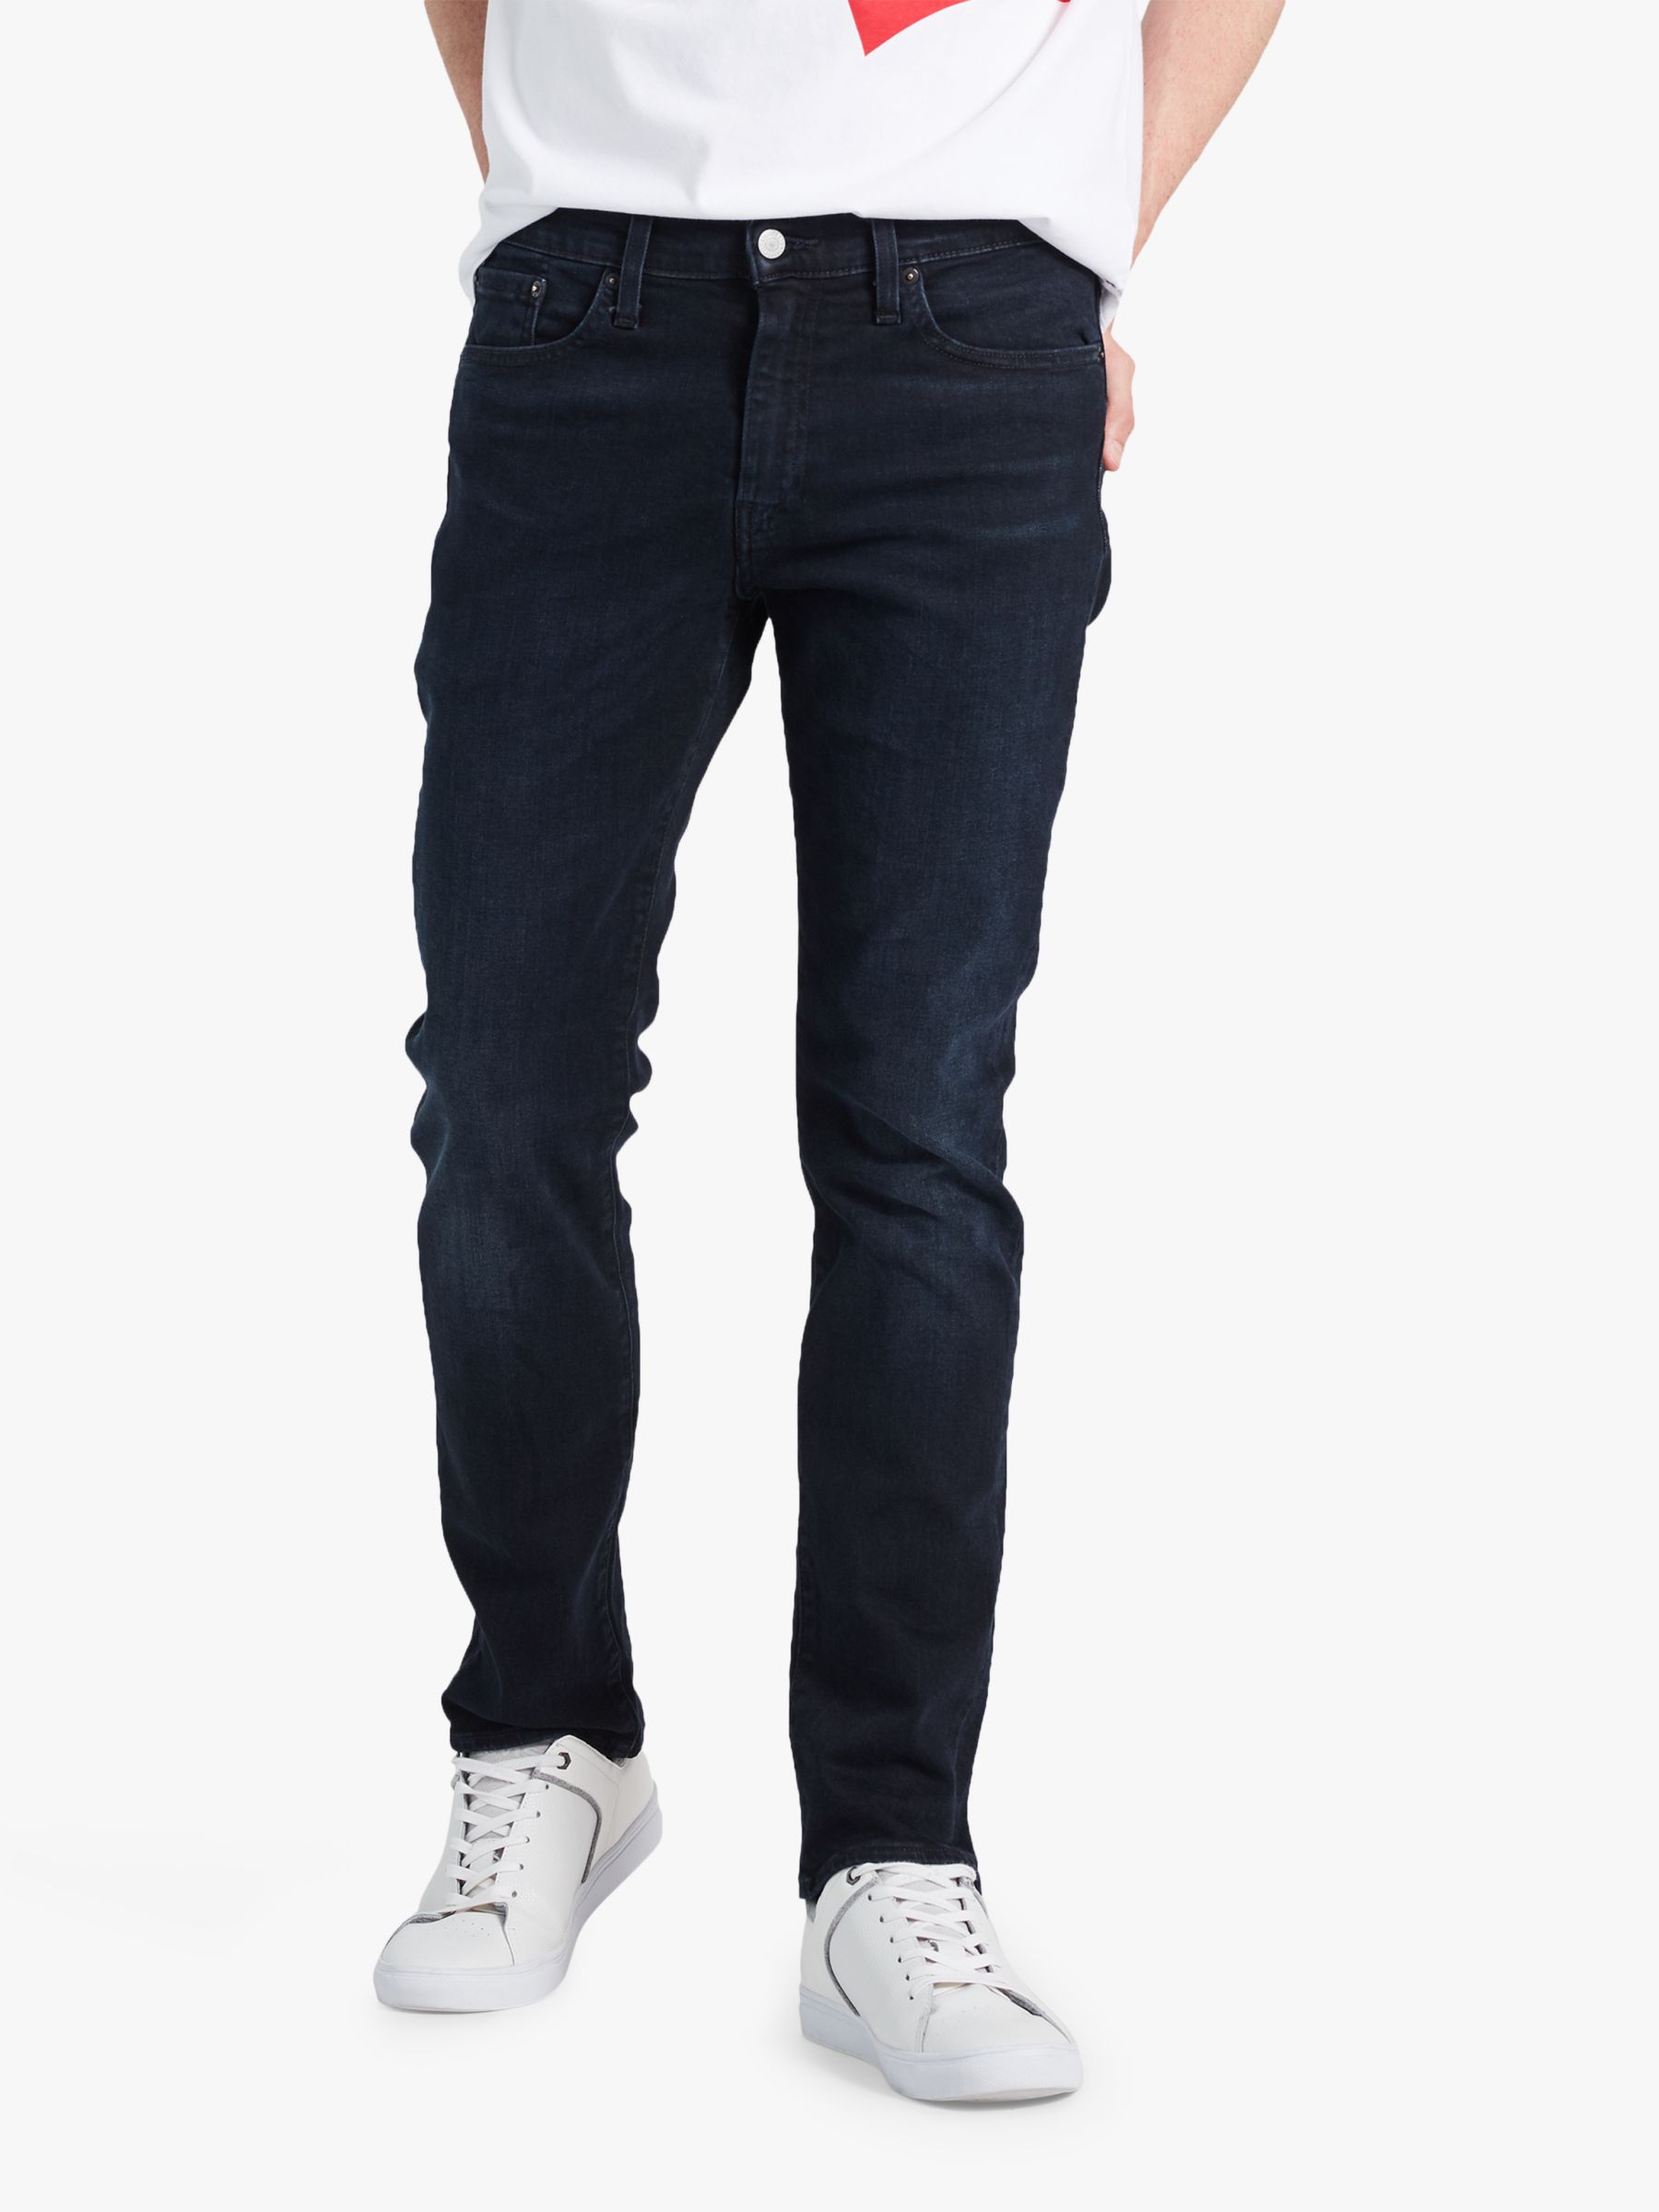 levis 511 straight jeans